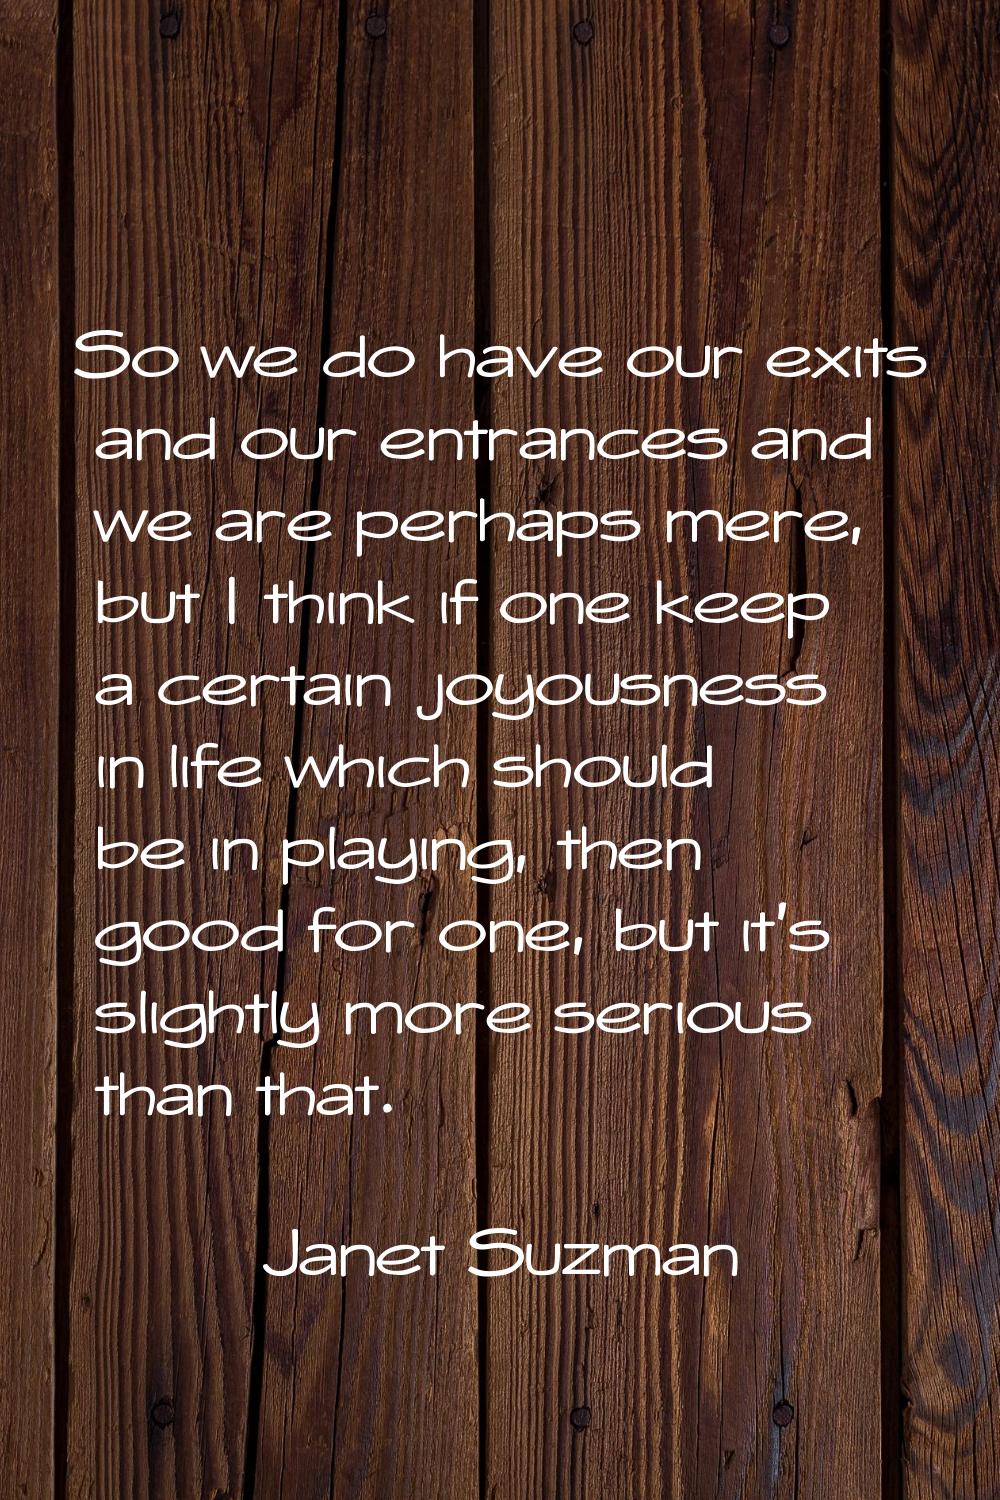 So we do have our exits and our entrances and we are perhaps mere, but I think if one keep a certai